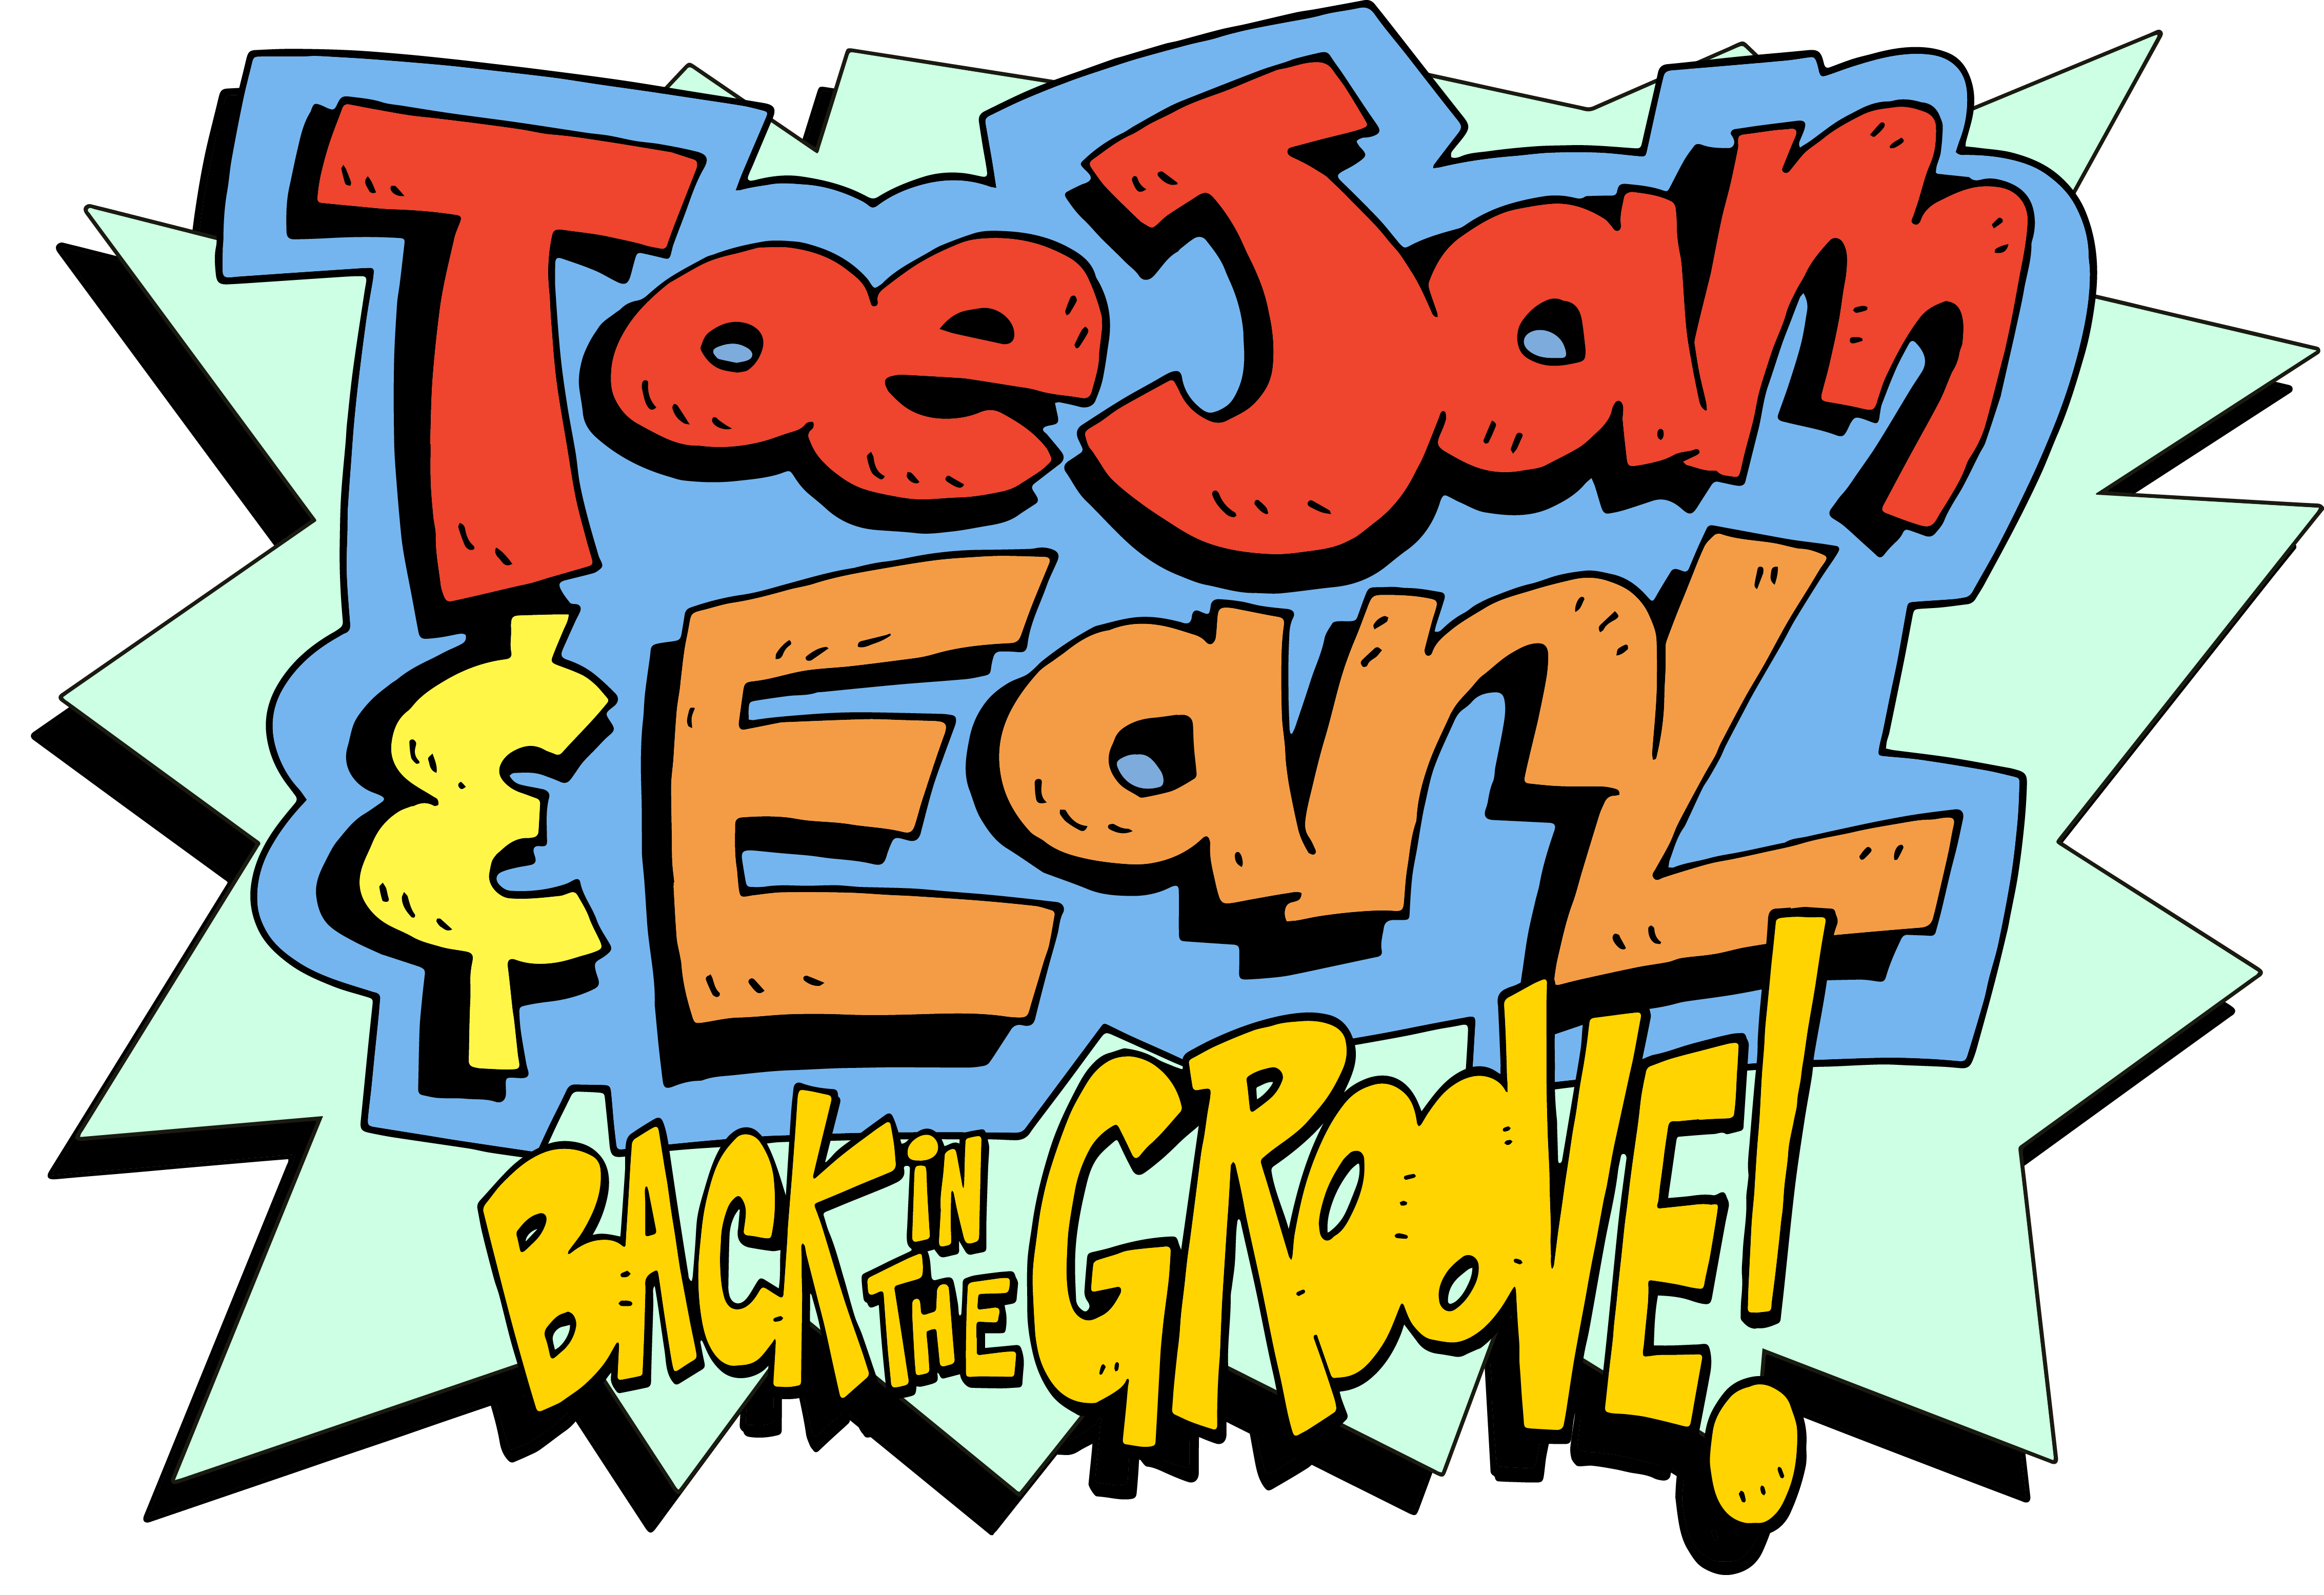 ToeJam and Earl Back in the Groove will funk you up in March 2019